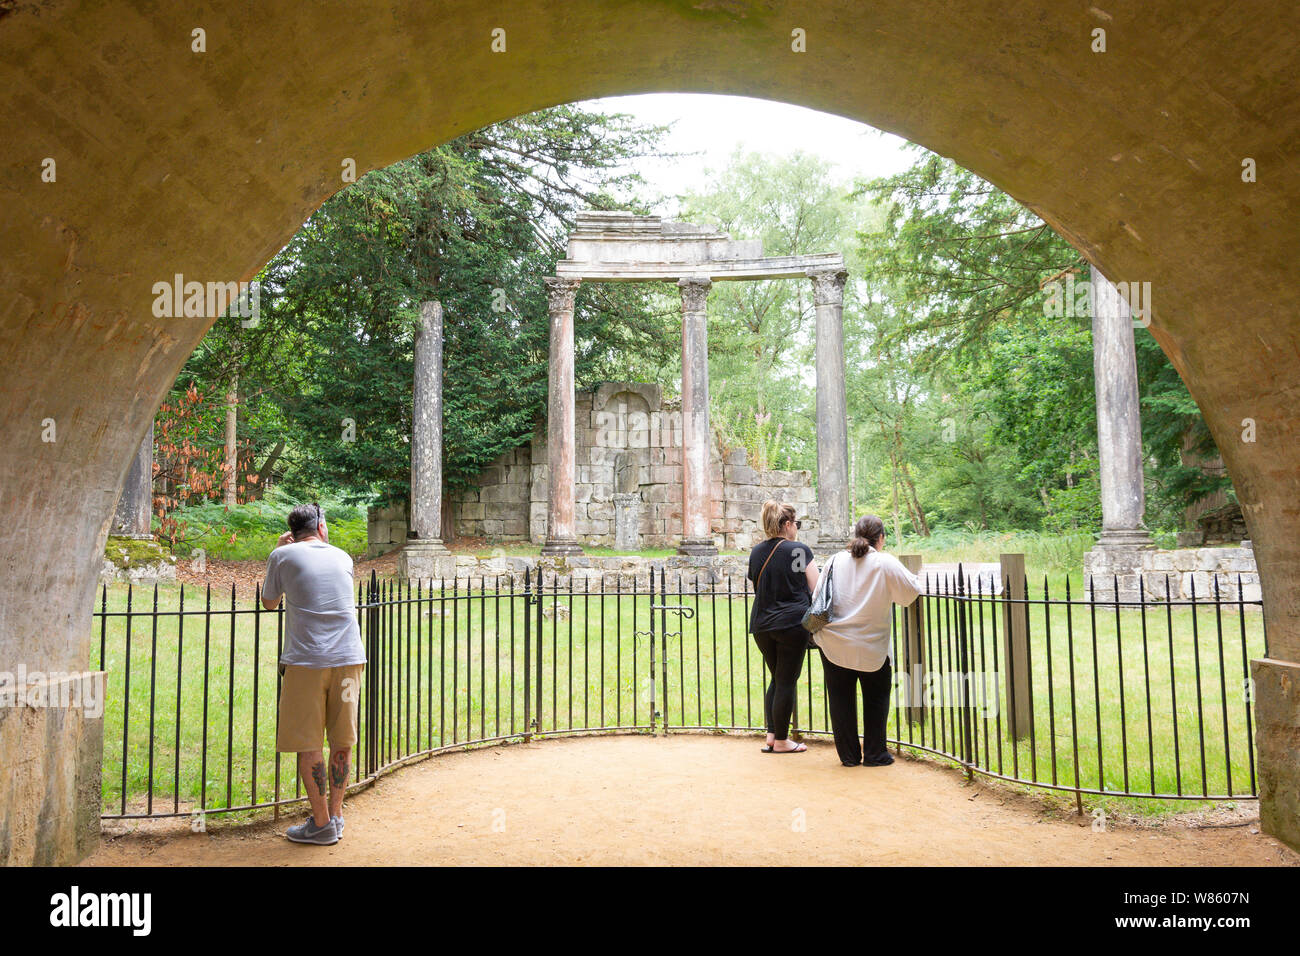 Les ruines à Virginia Water, Windsor Great Park, Runnymede, Surrey, Angleterre, Royaume-Uni Banque D'Images